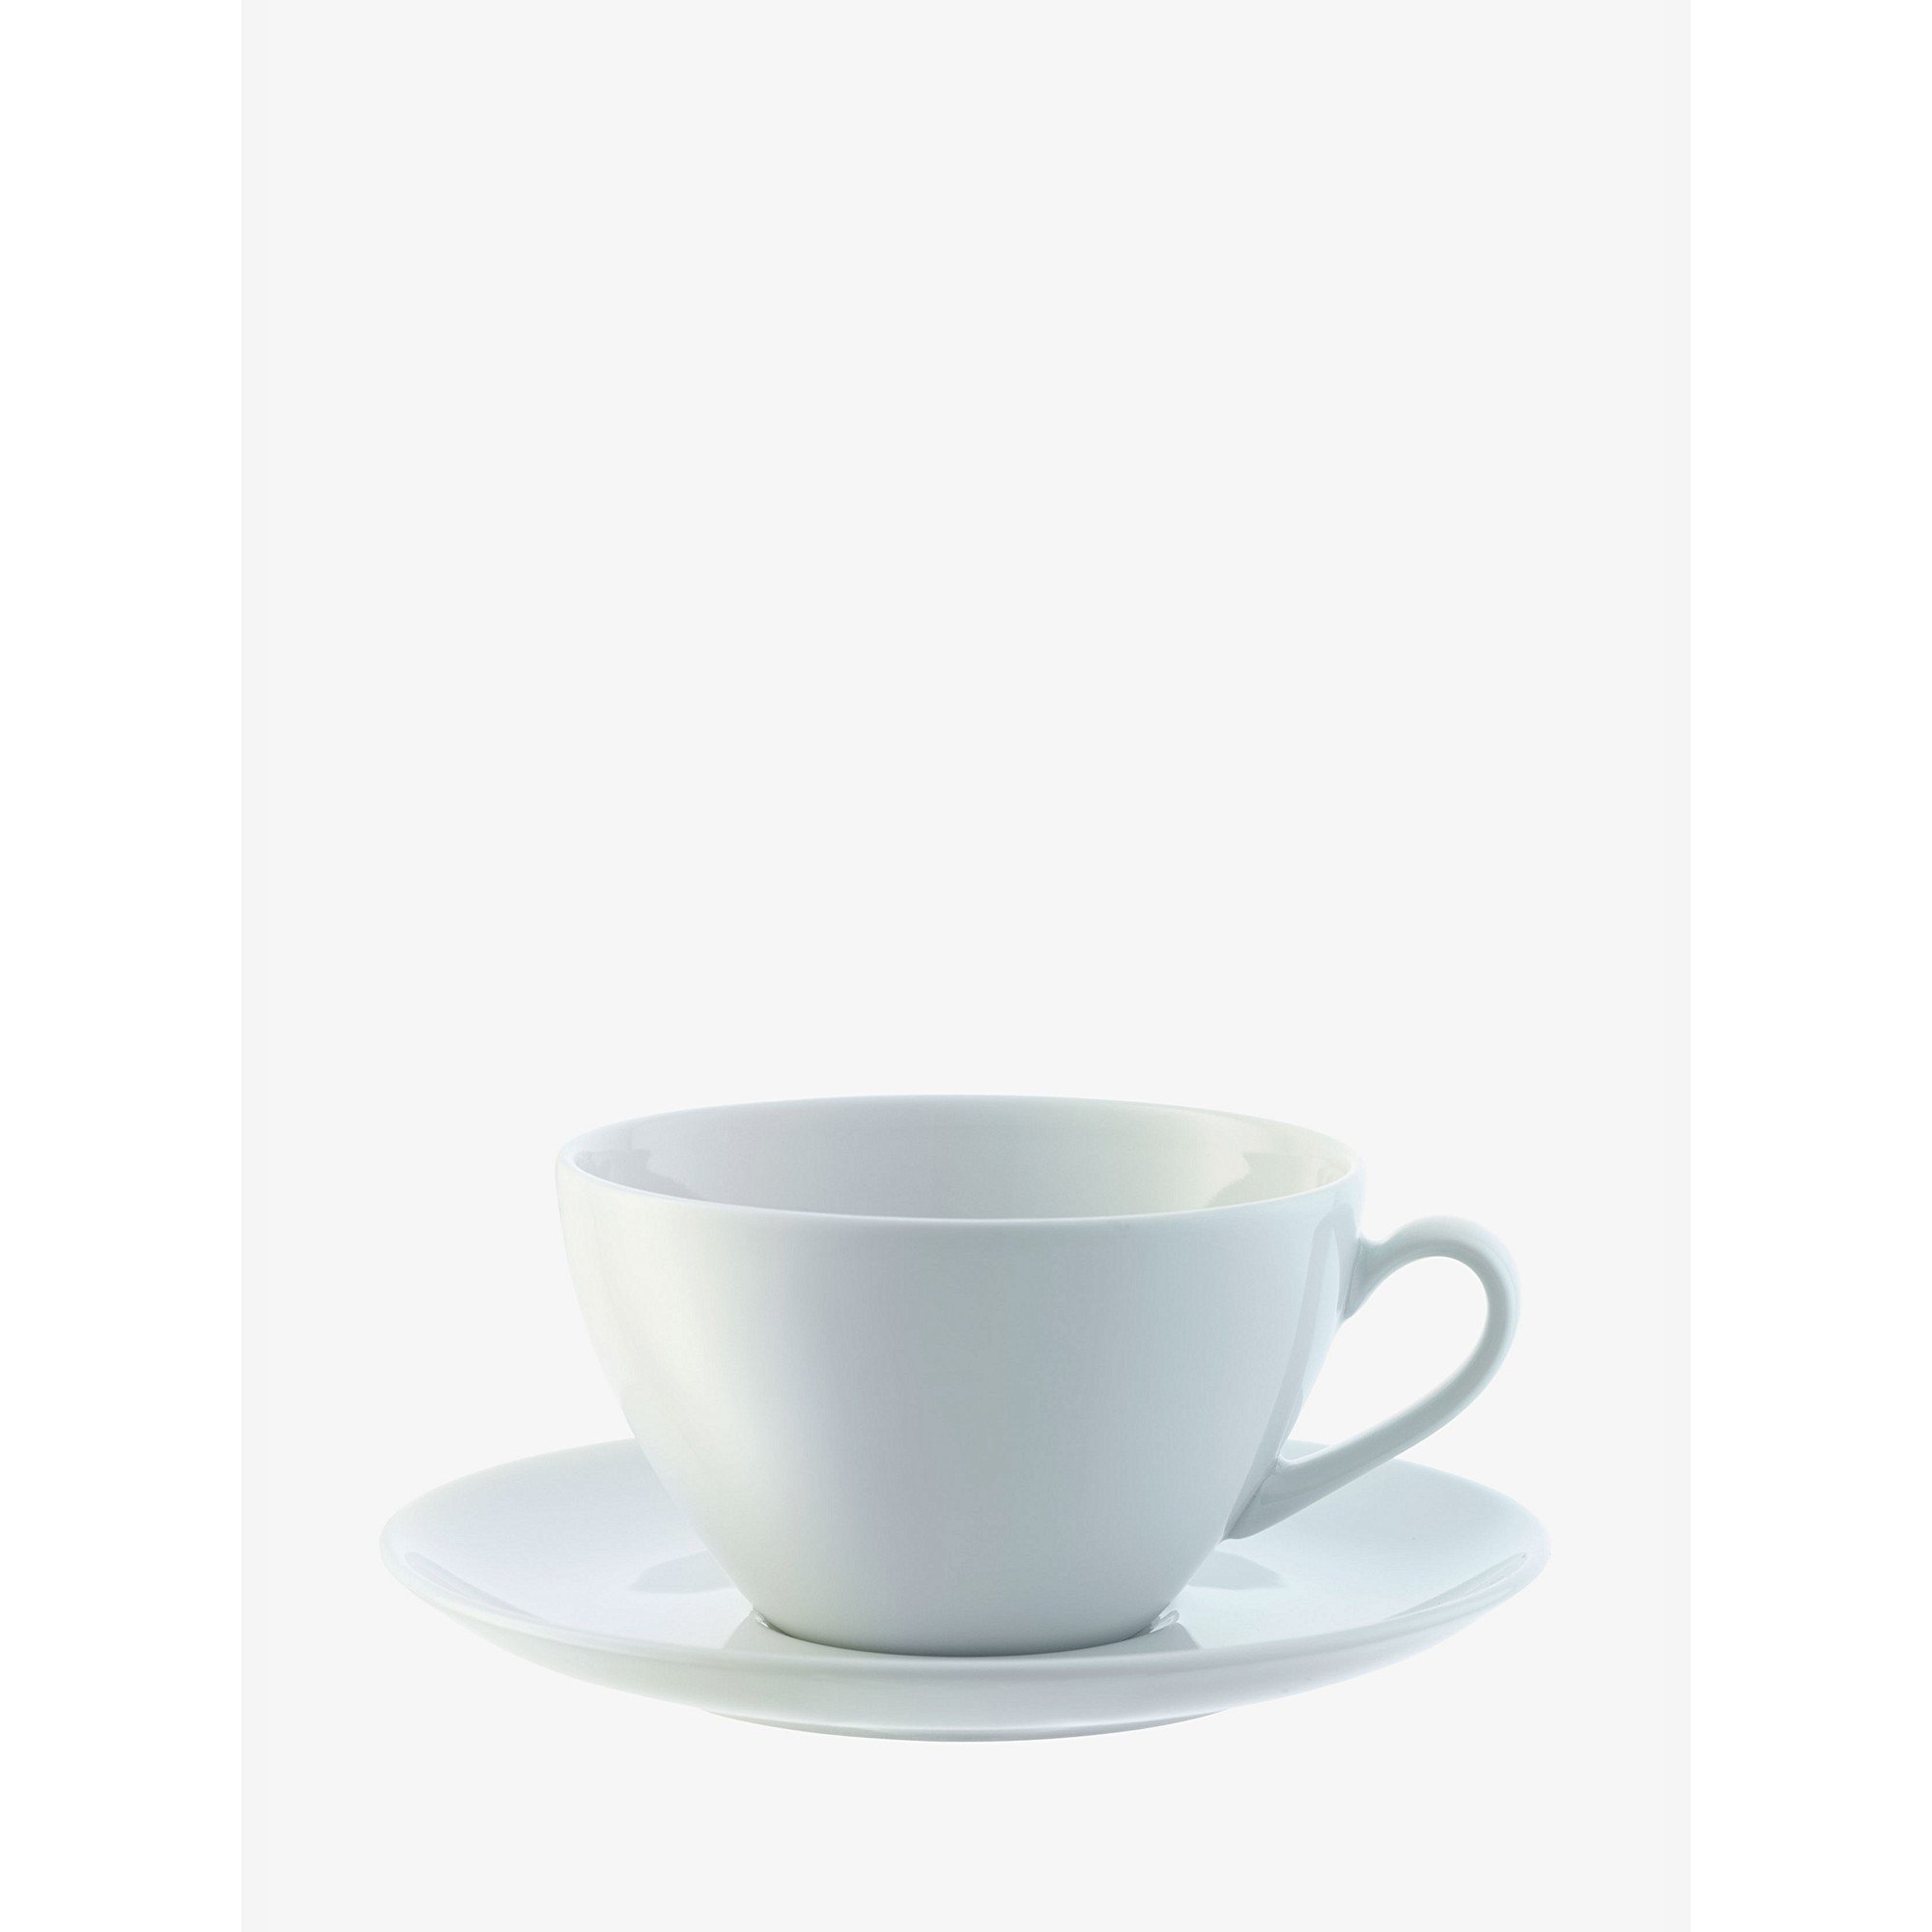 LSA Dine Cappuccino Cup & Saucer Image